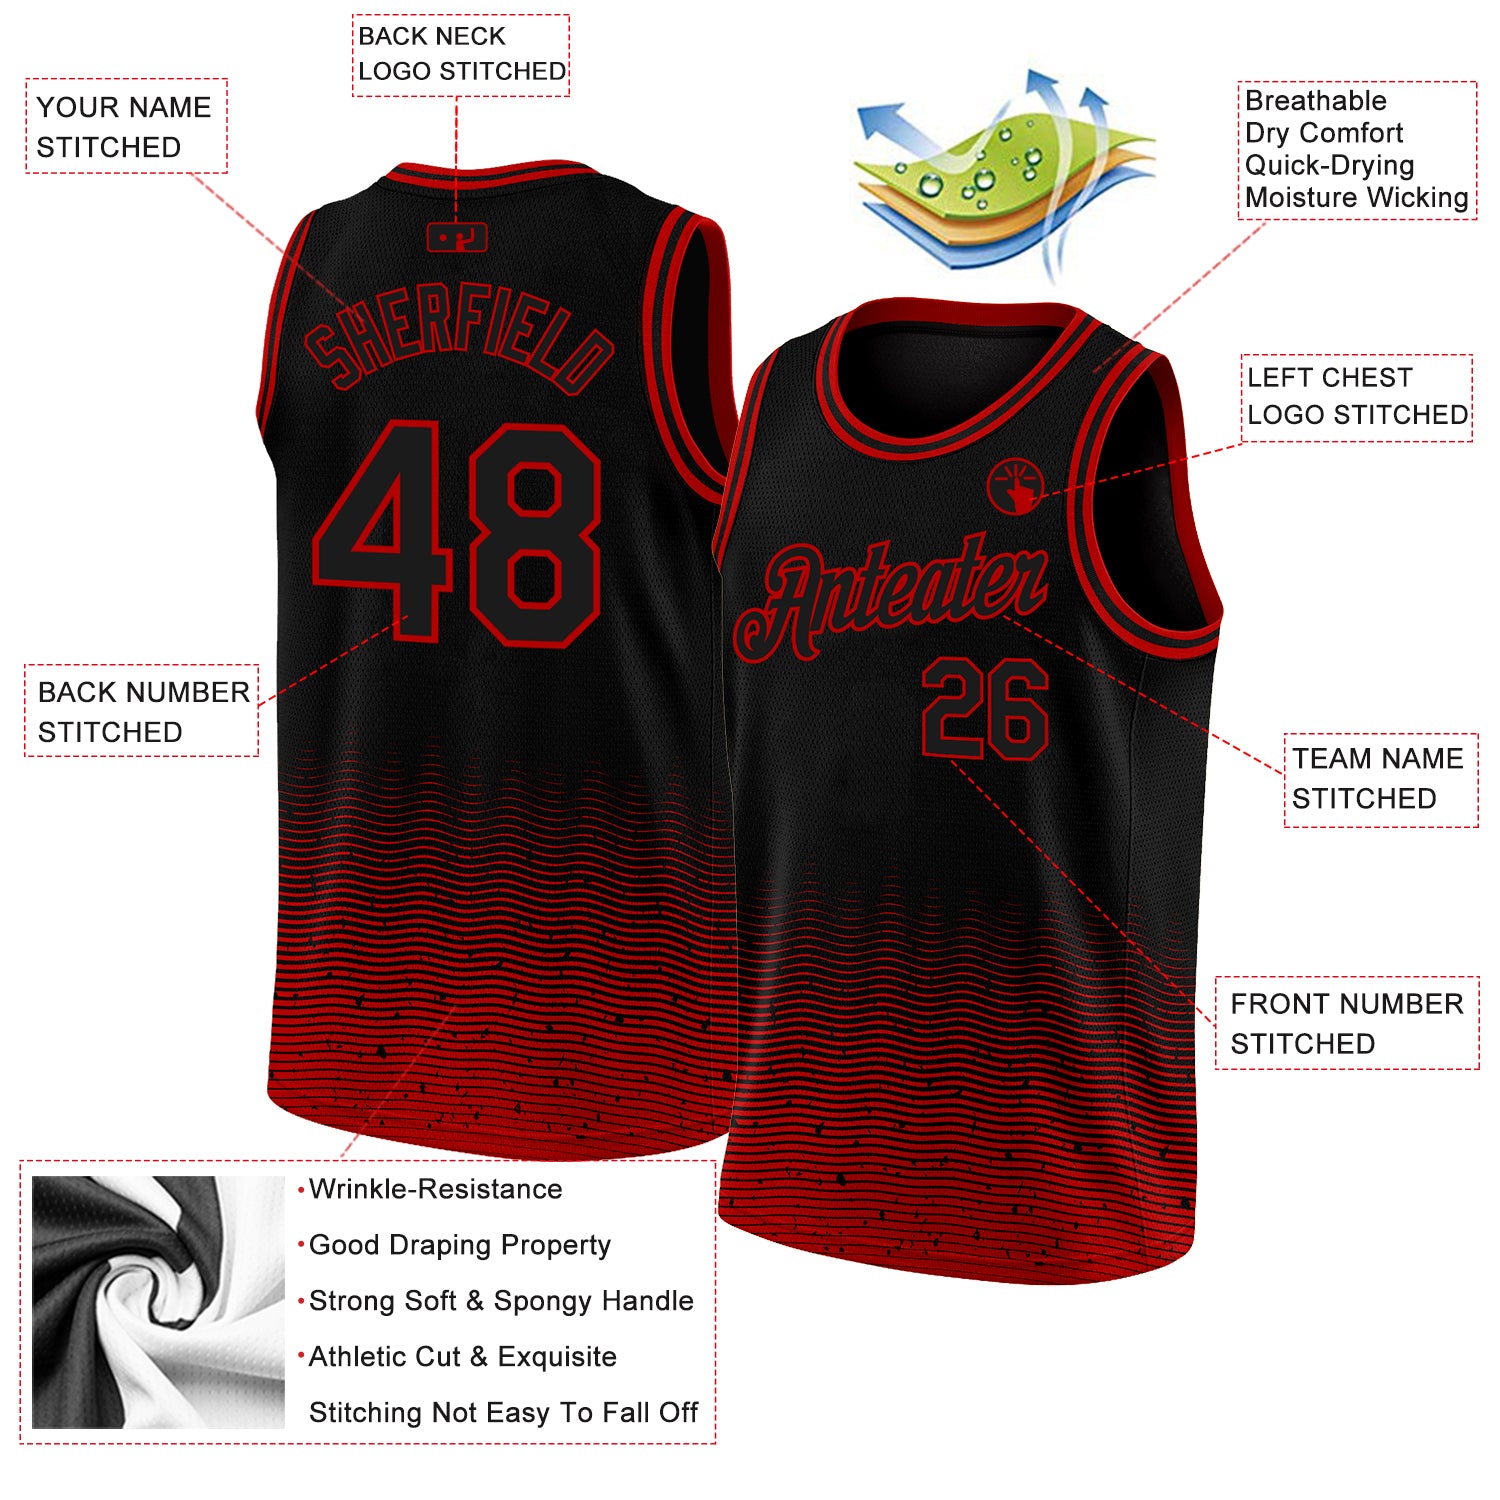 Custom Red Red-Black Round Neck Sublimation Basketball Suit Jersey Discount